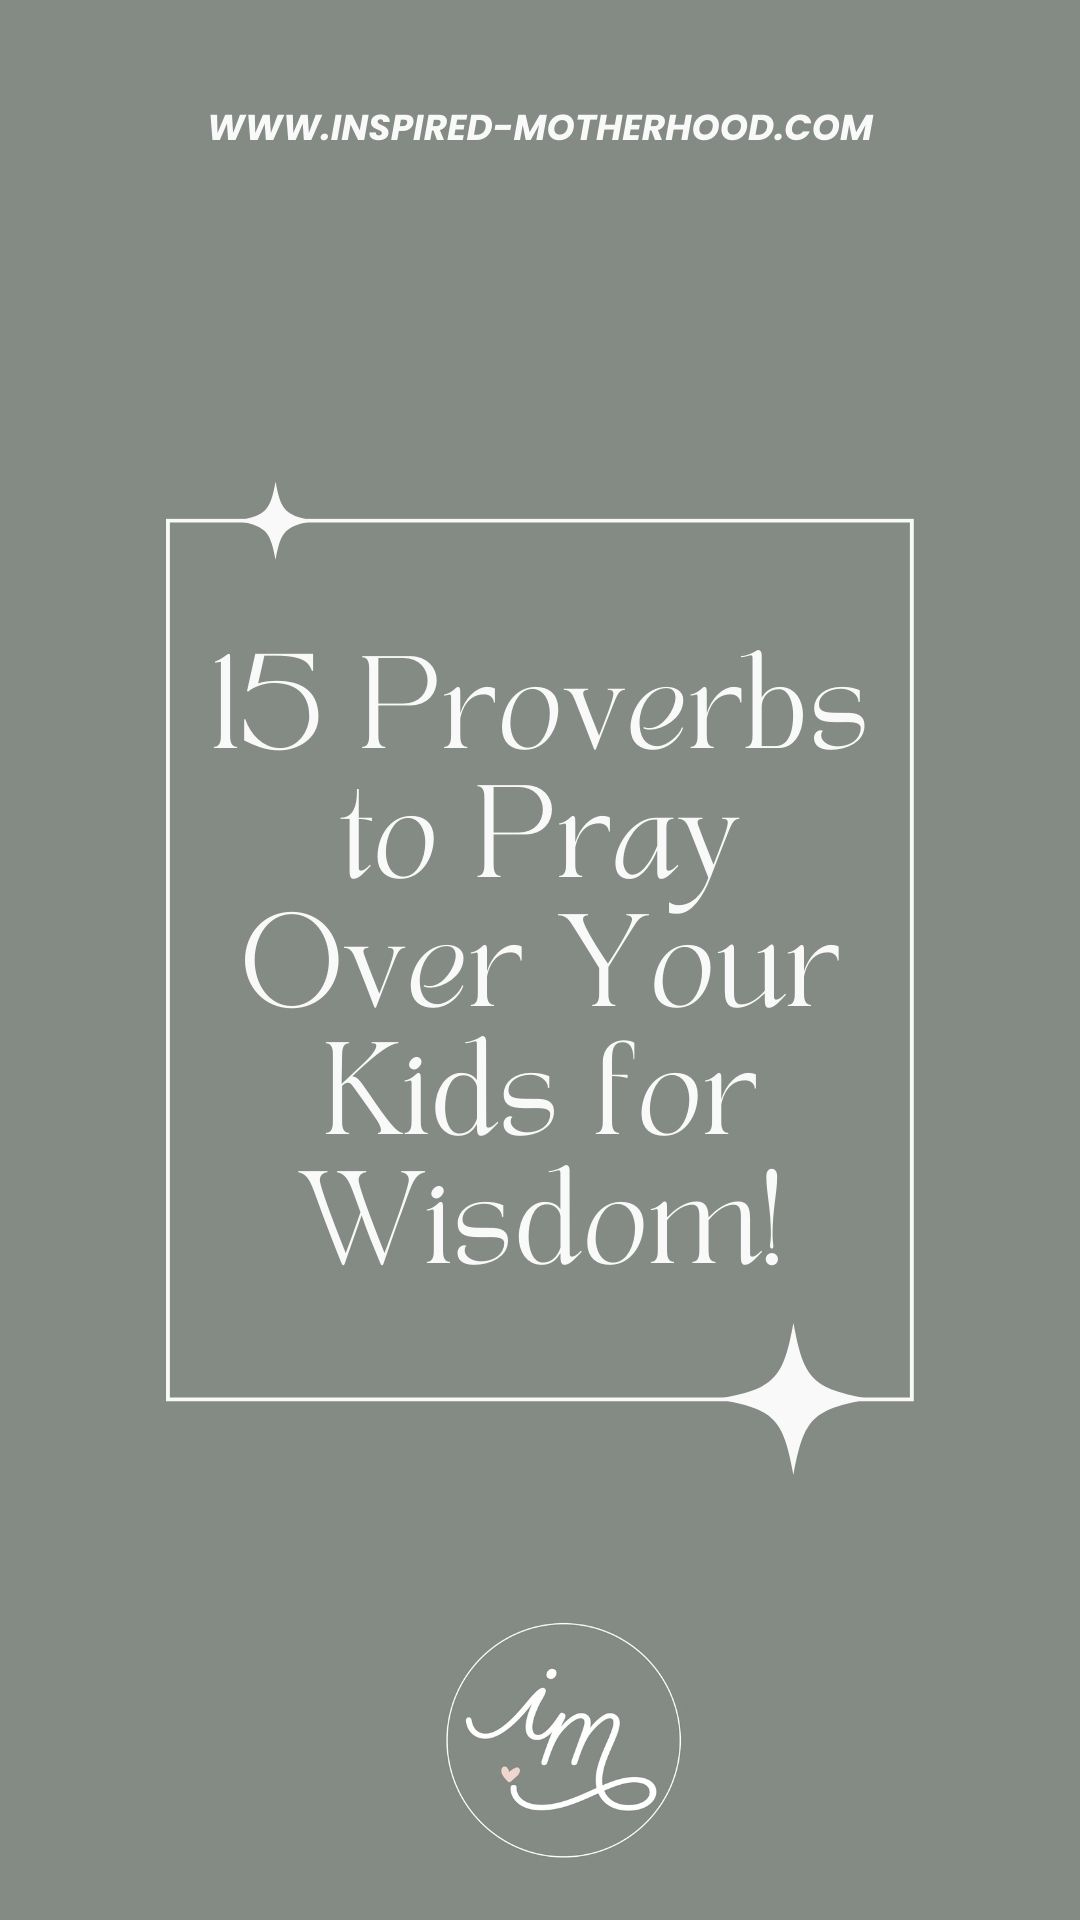 Speak life into your children! Here are 15 proverbs to pray over your kids for wisdom, kind hearts, and good friends.